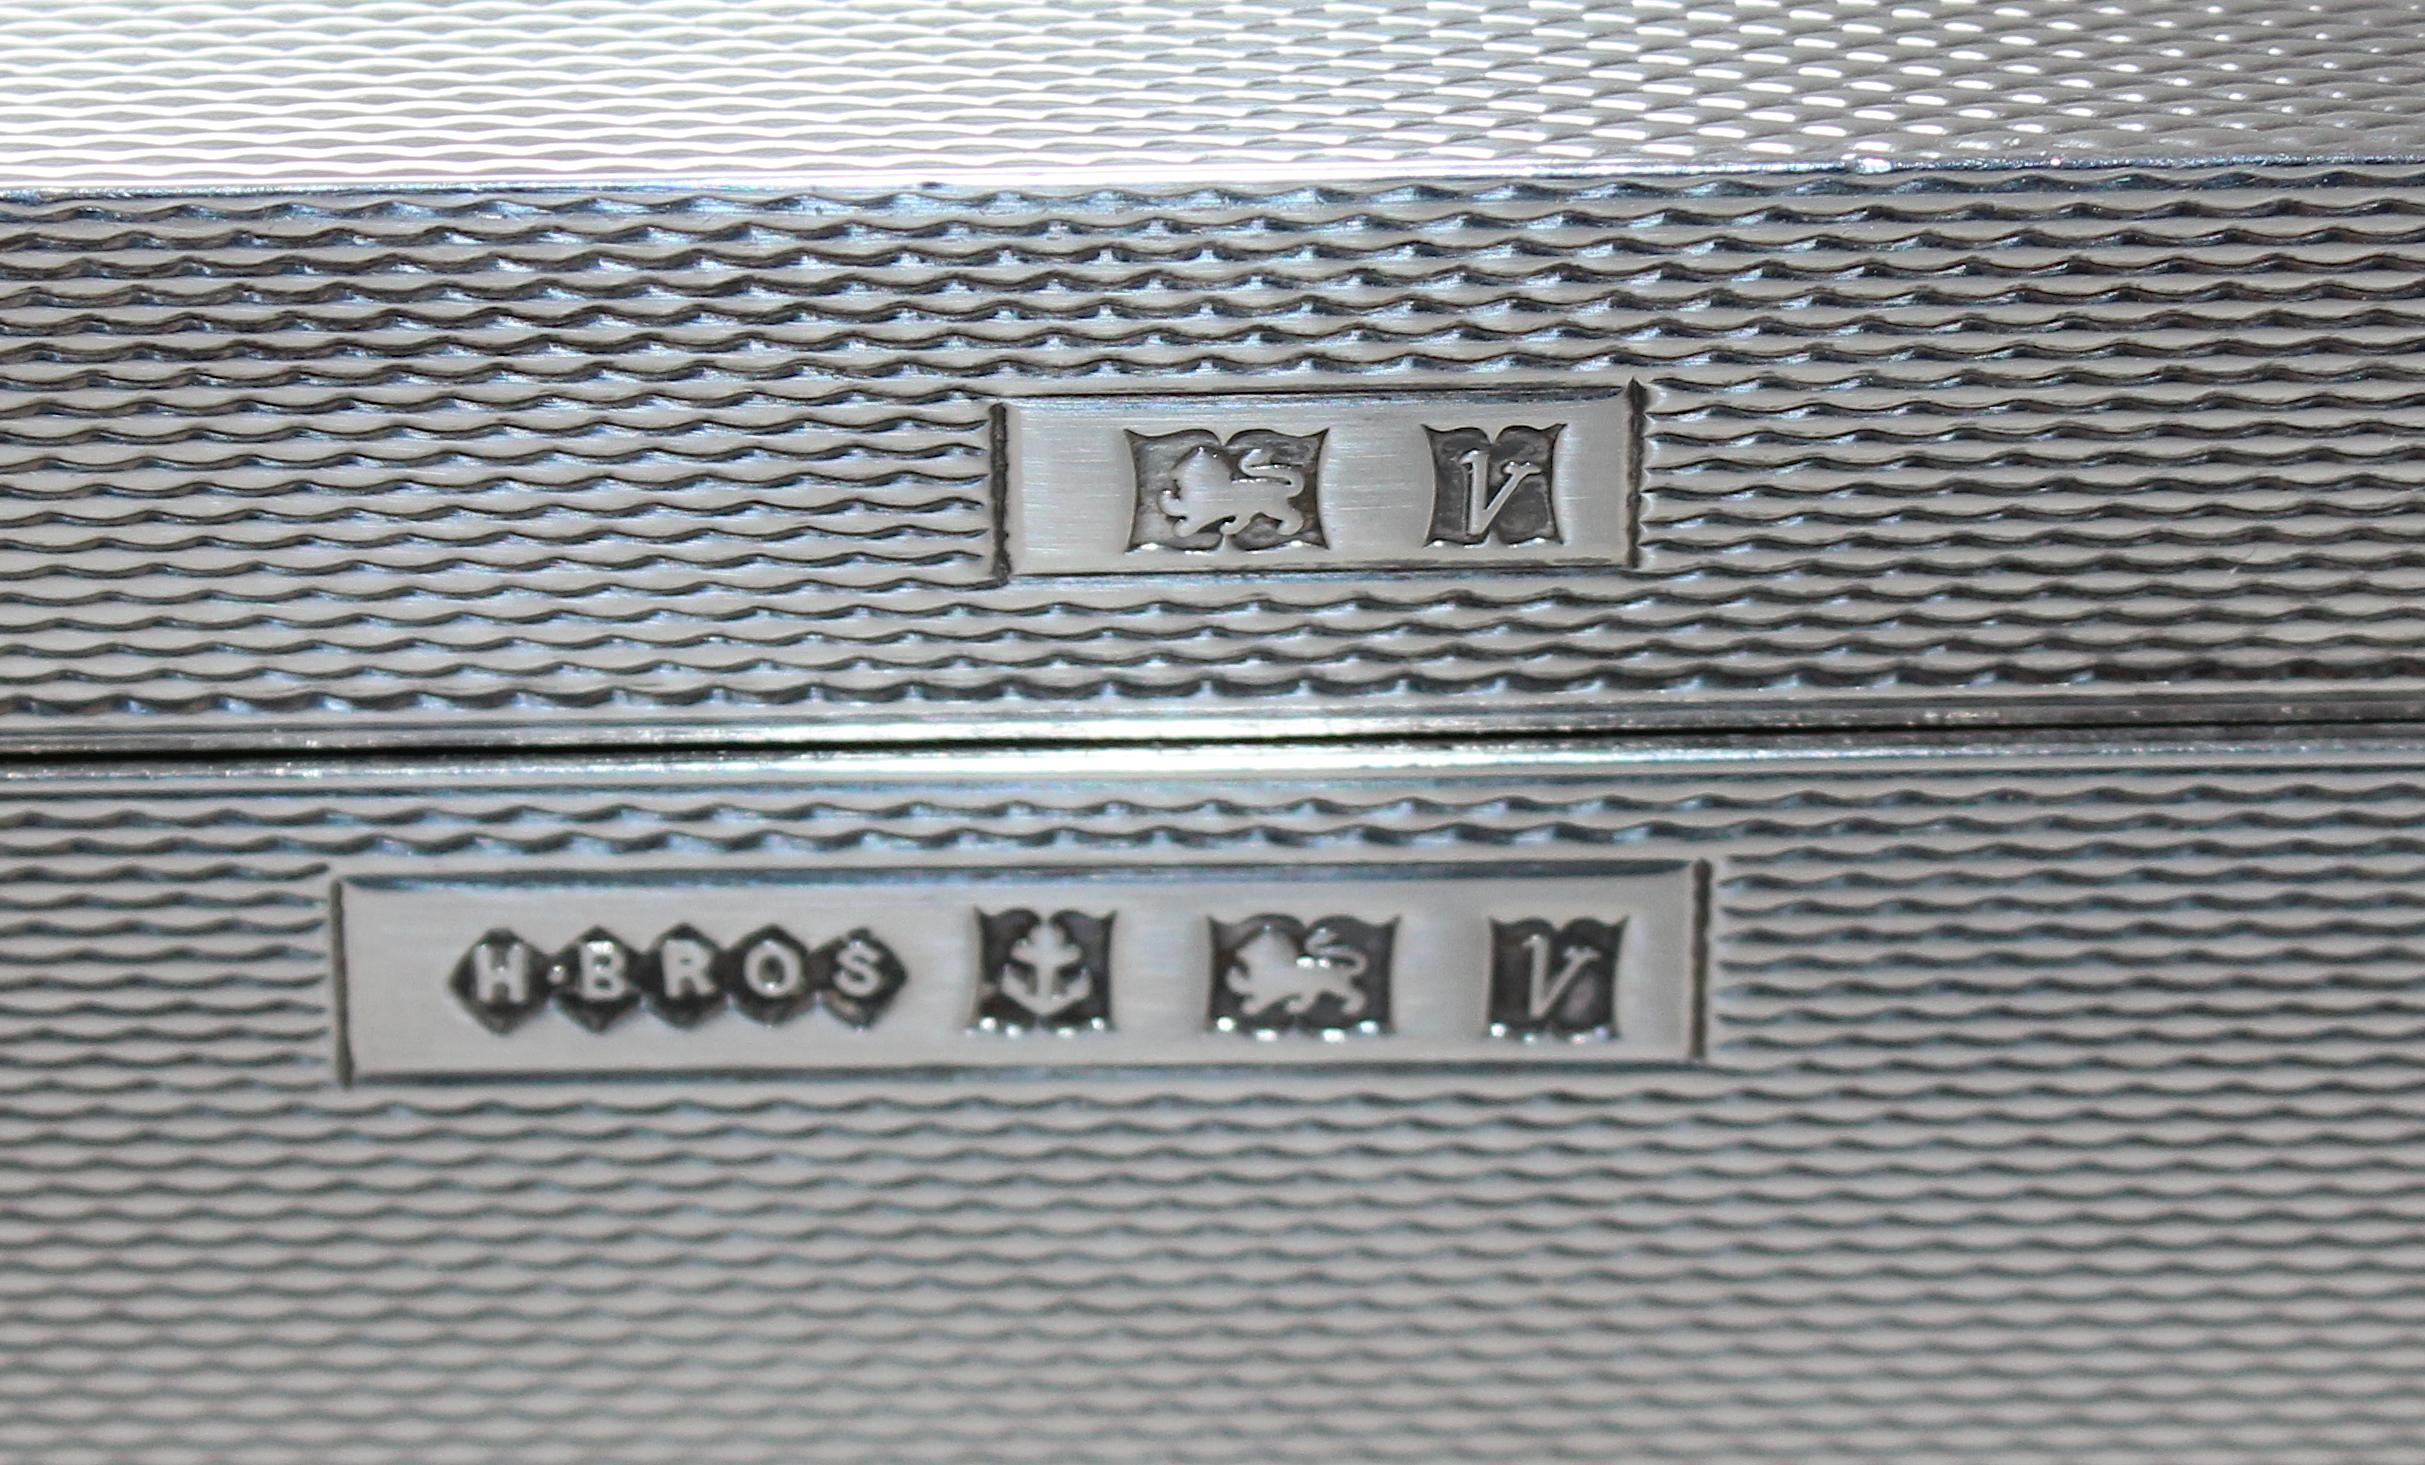 Art Deco 1932 Harmon Bros box sterling silver English Hallmarks mahogany lining moveable inserts from a Palm Beach estate.

Ready for your monogram.